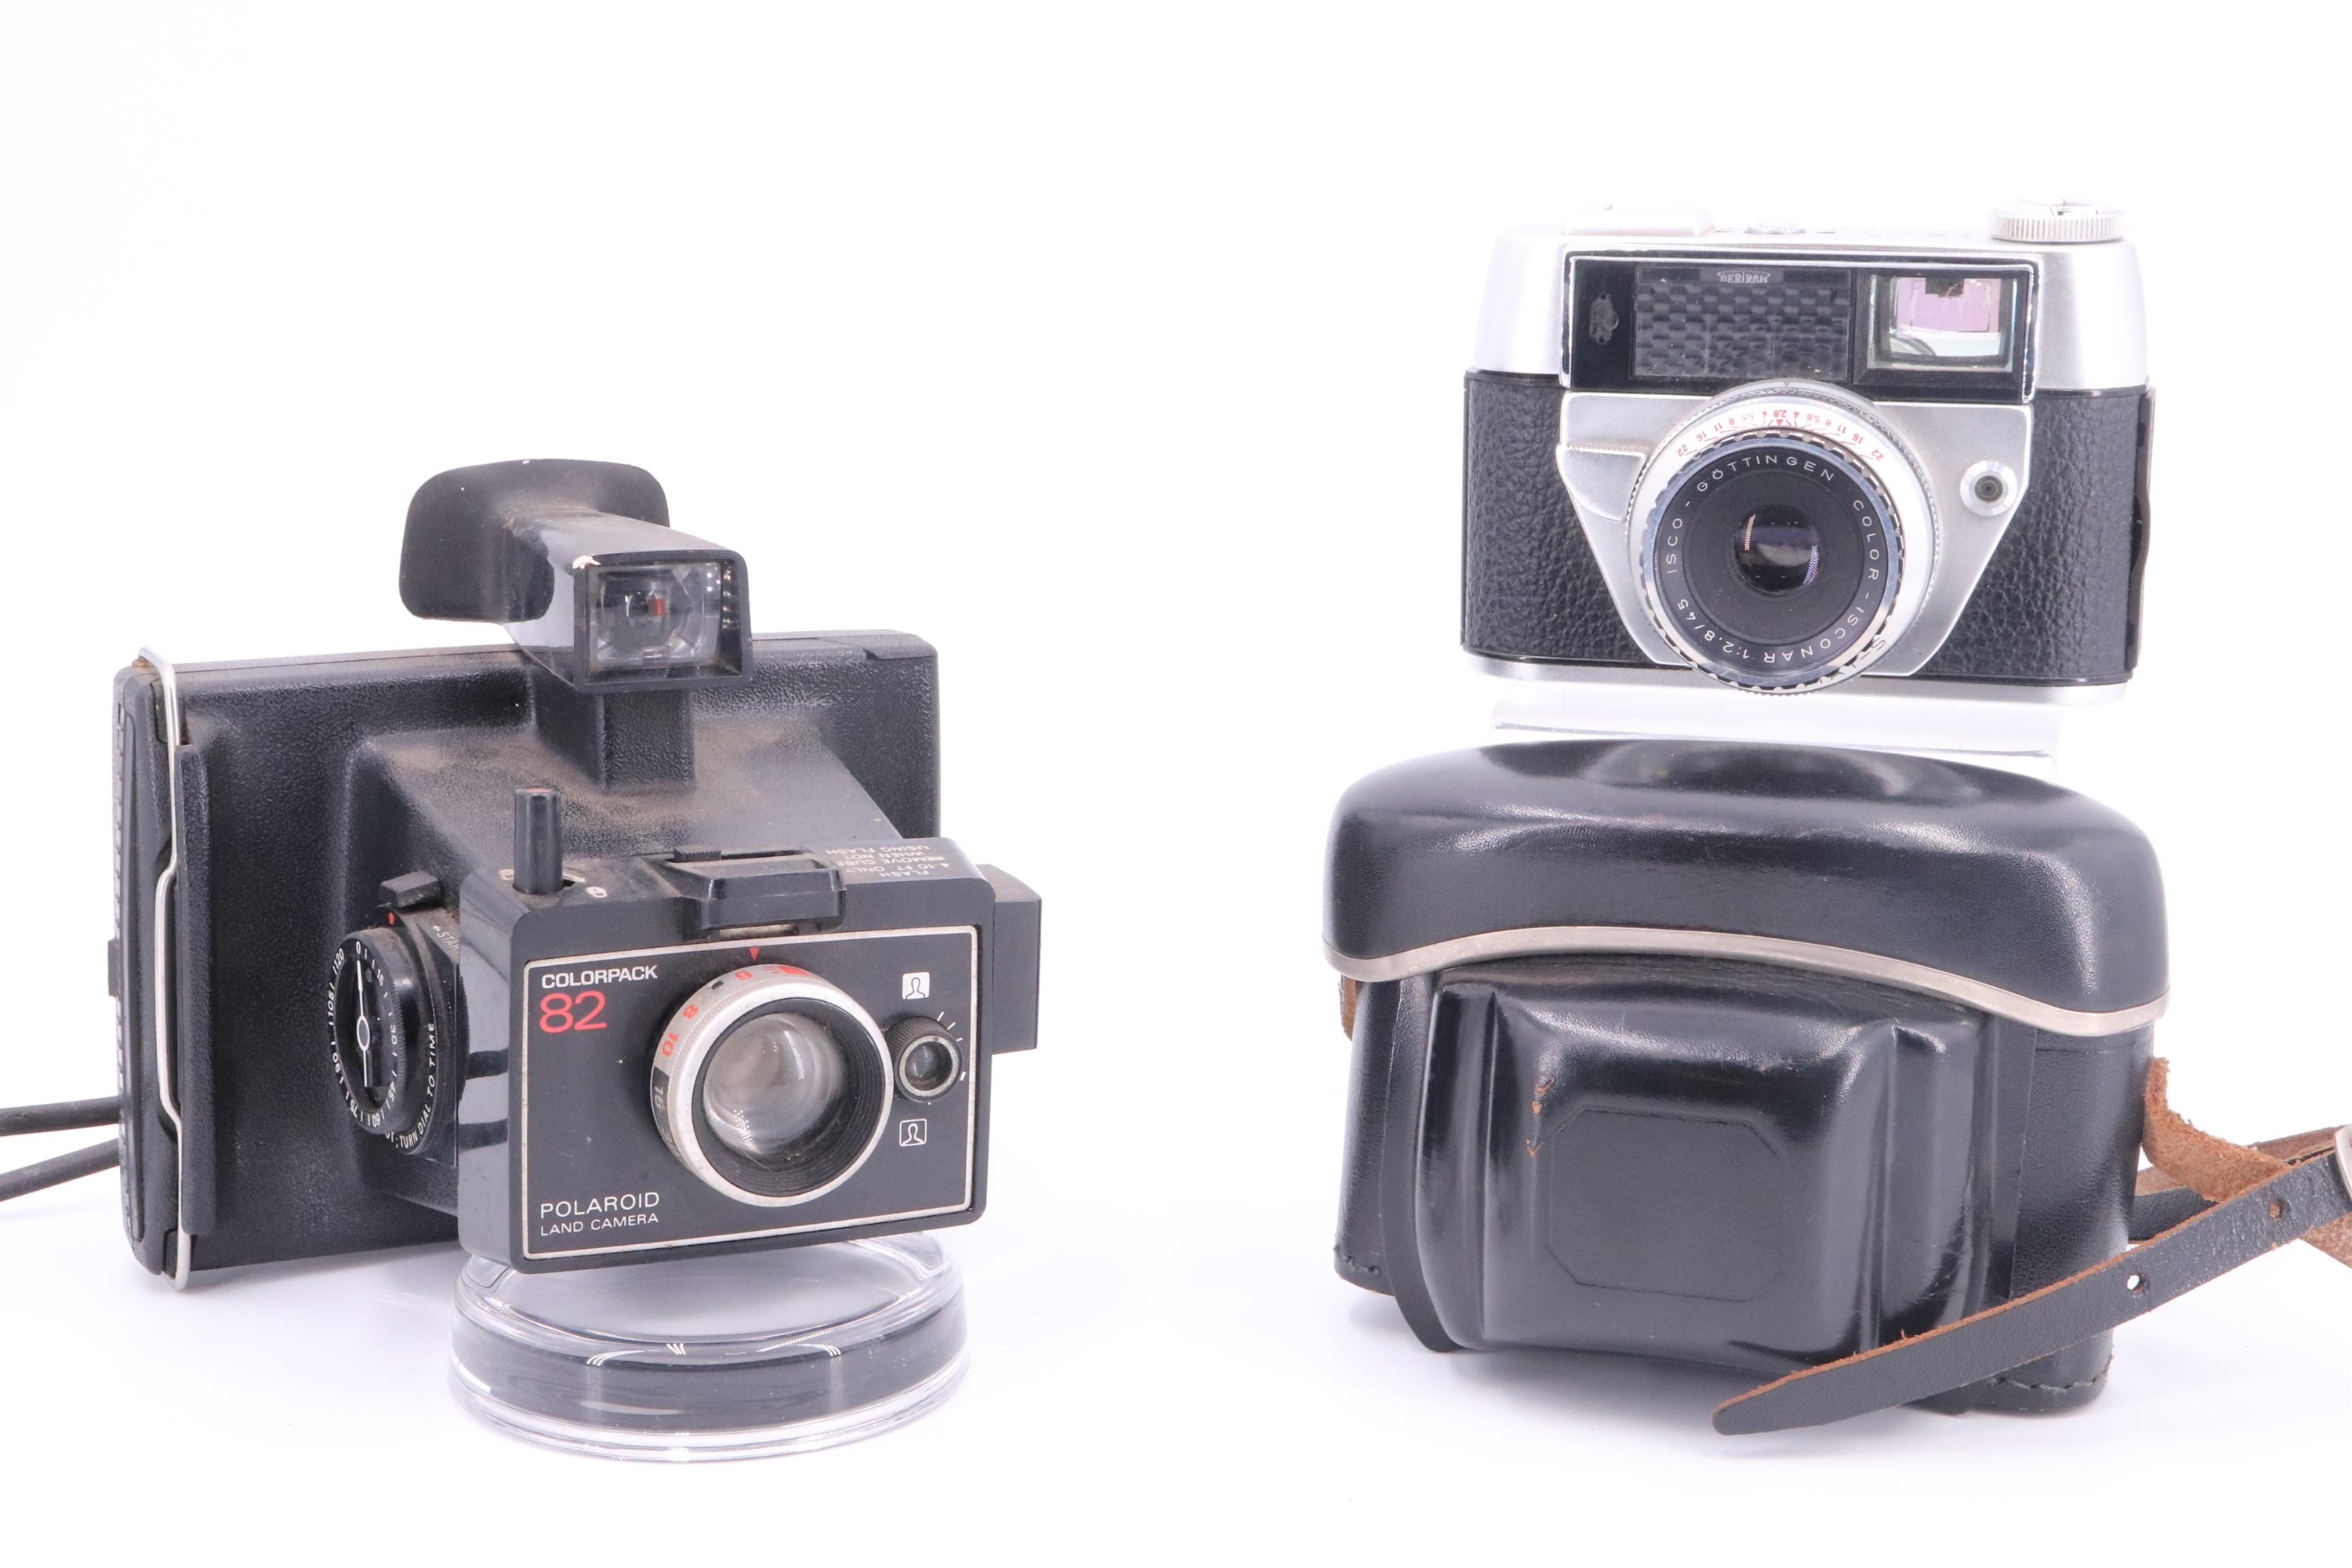 An Olympia "Regula Auto - Set II" camera together with a Polaroid "Colorpack 82" land camera